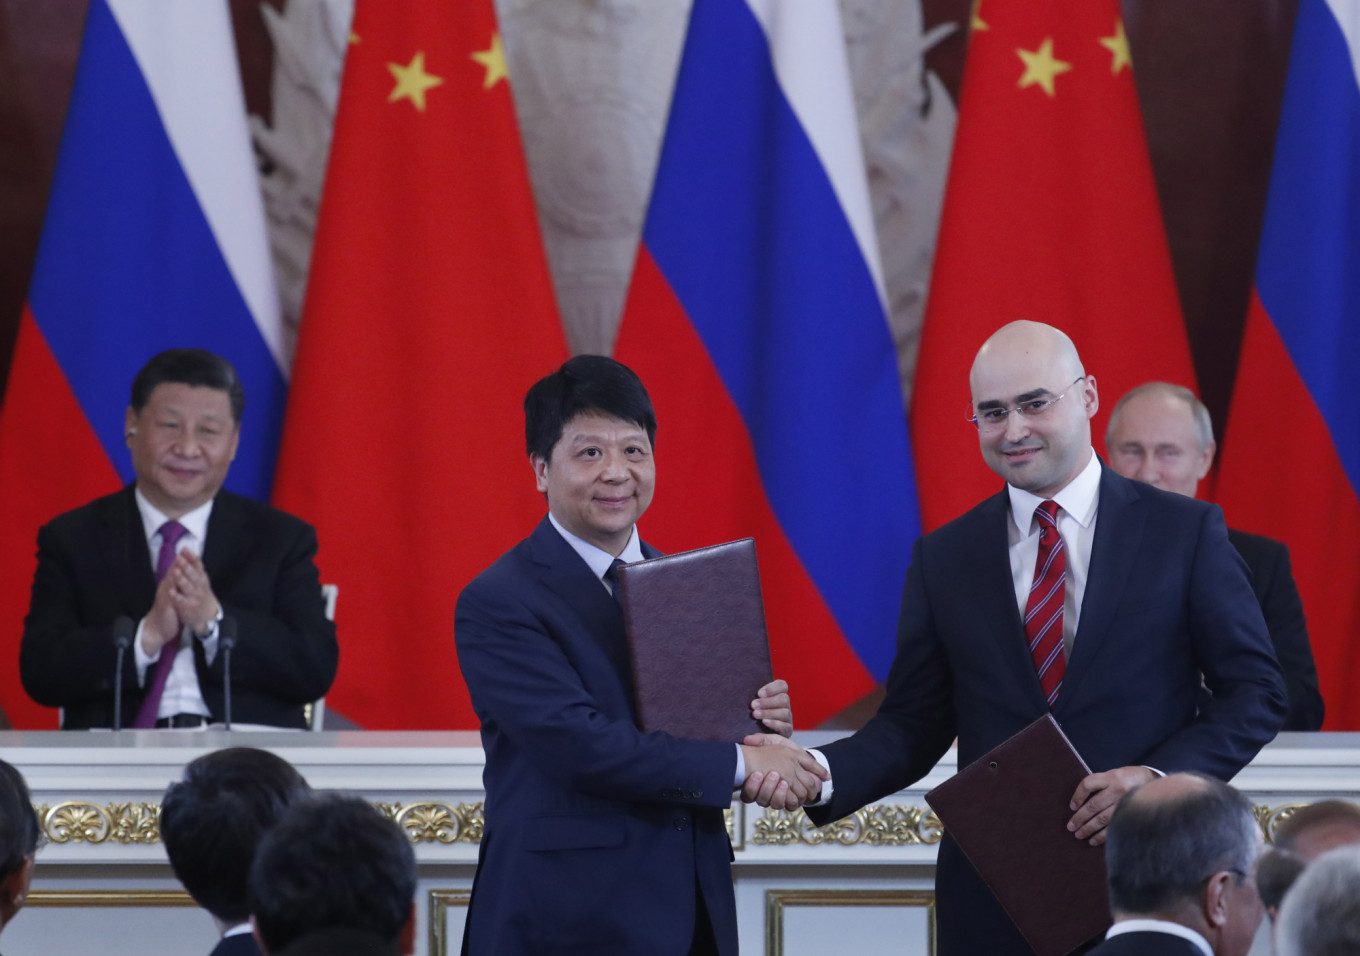 Russia’s MTS Signs 5G Deal With Chinese Telecom Giant Huawei, Reports Say